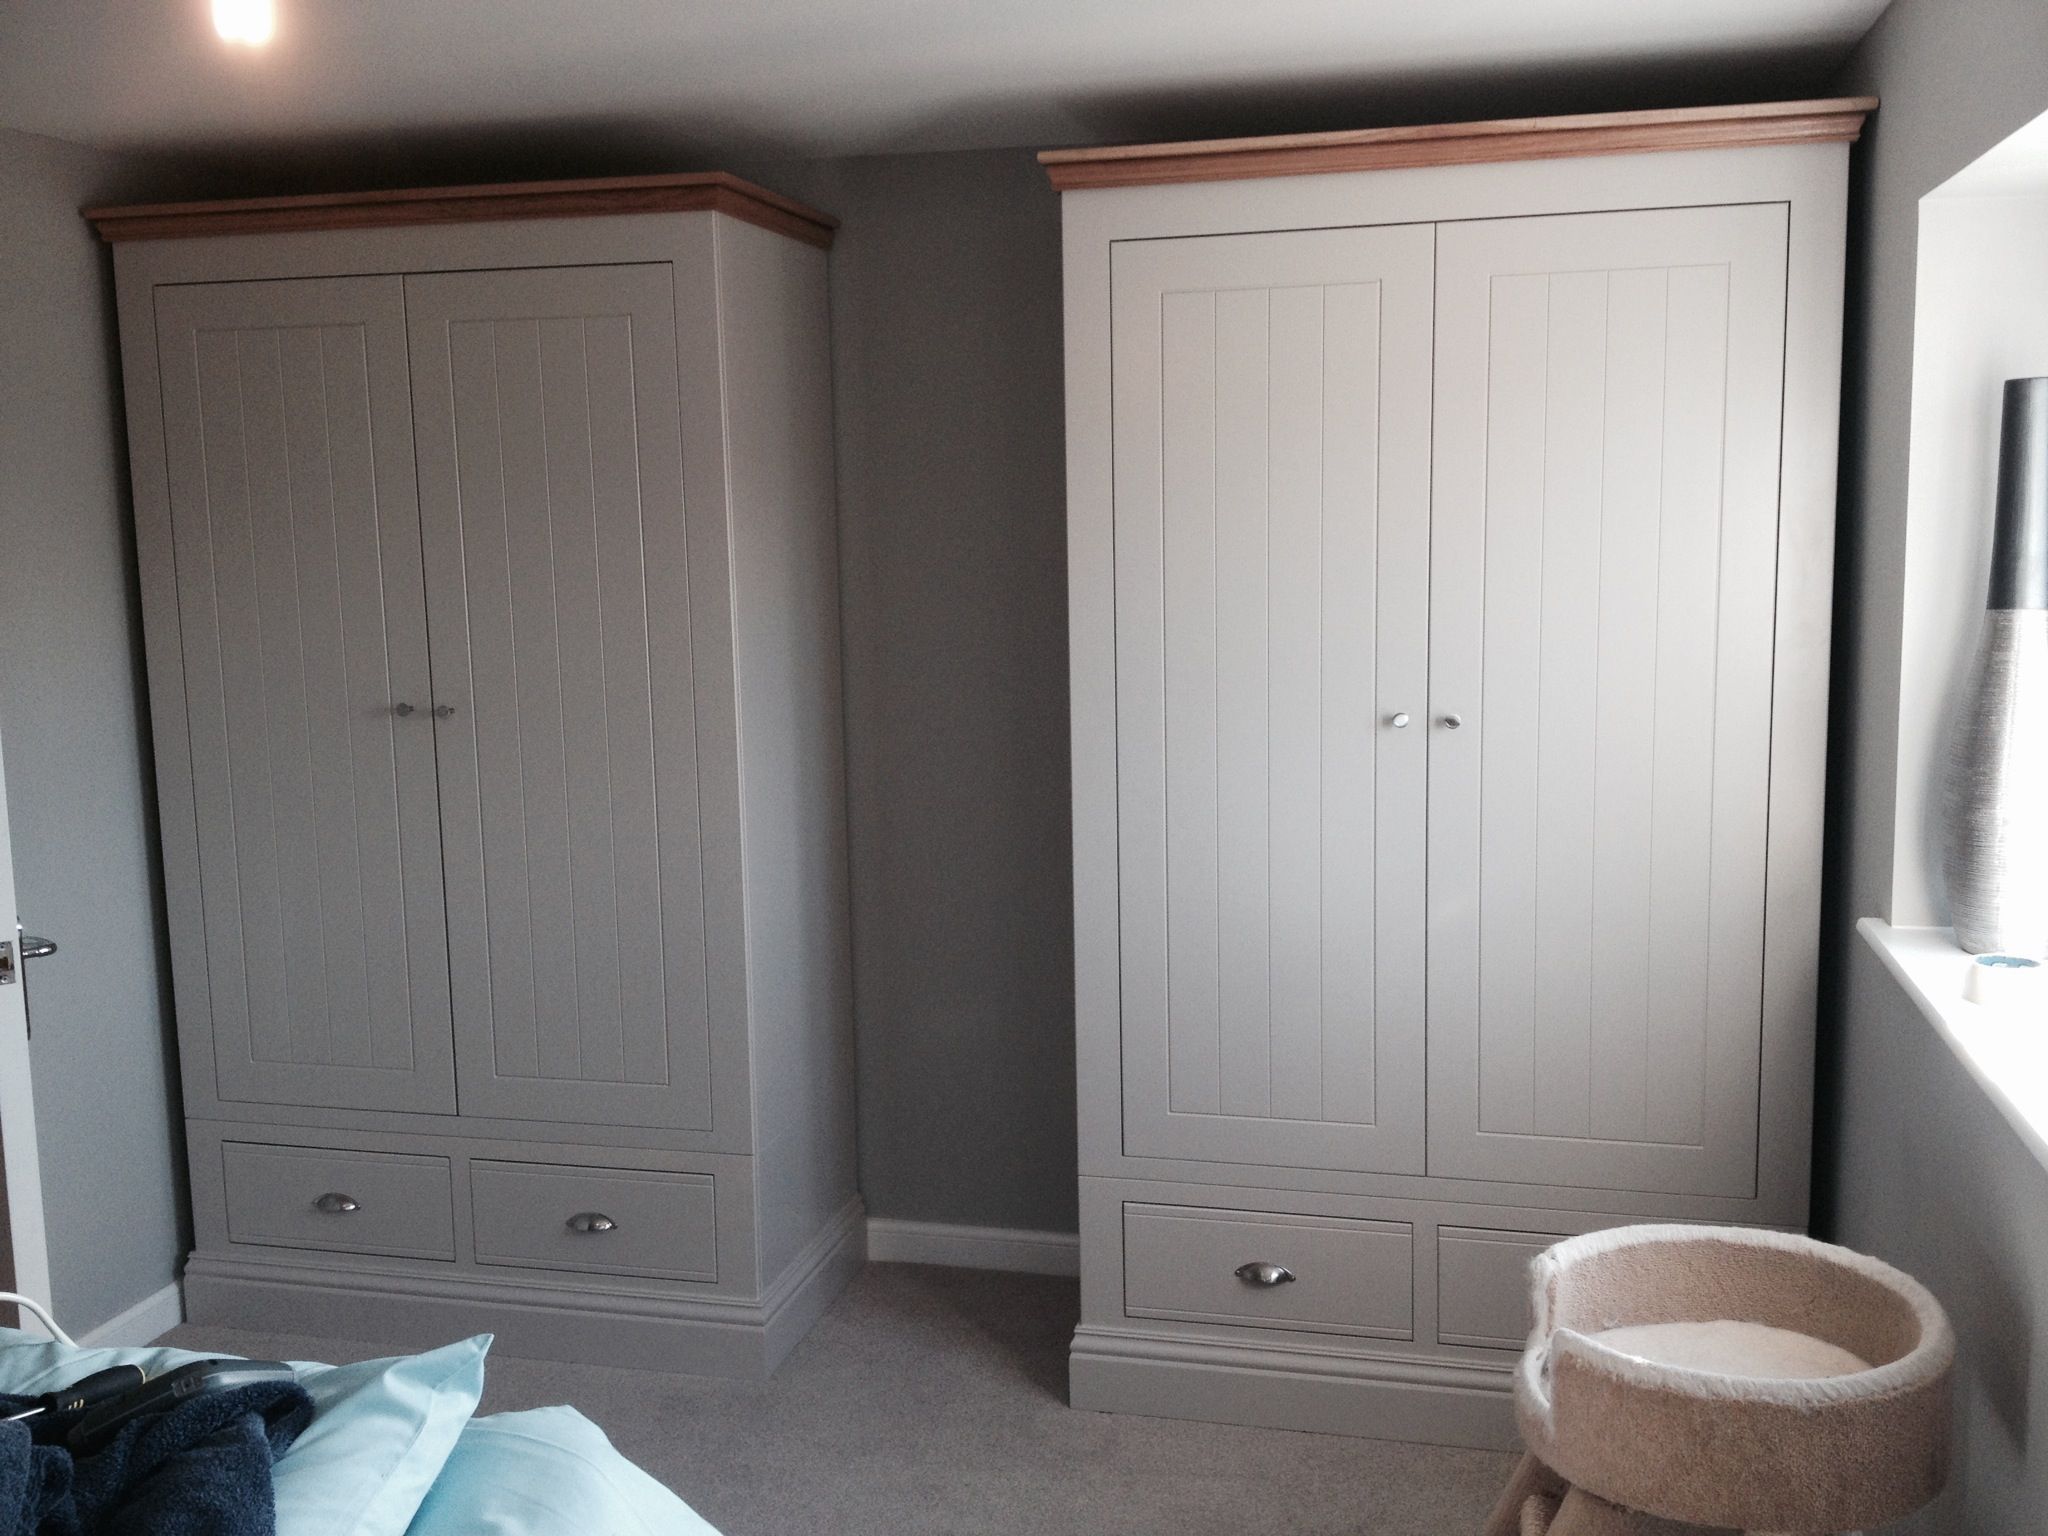 Two Of Our New England Extra Tall Wardrobes Installed Today | Tall Cabinet  Storage, Furniture, Classic Interior Within Tall Wardrobes (View 12 of 15)